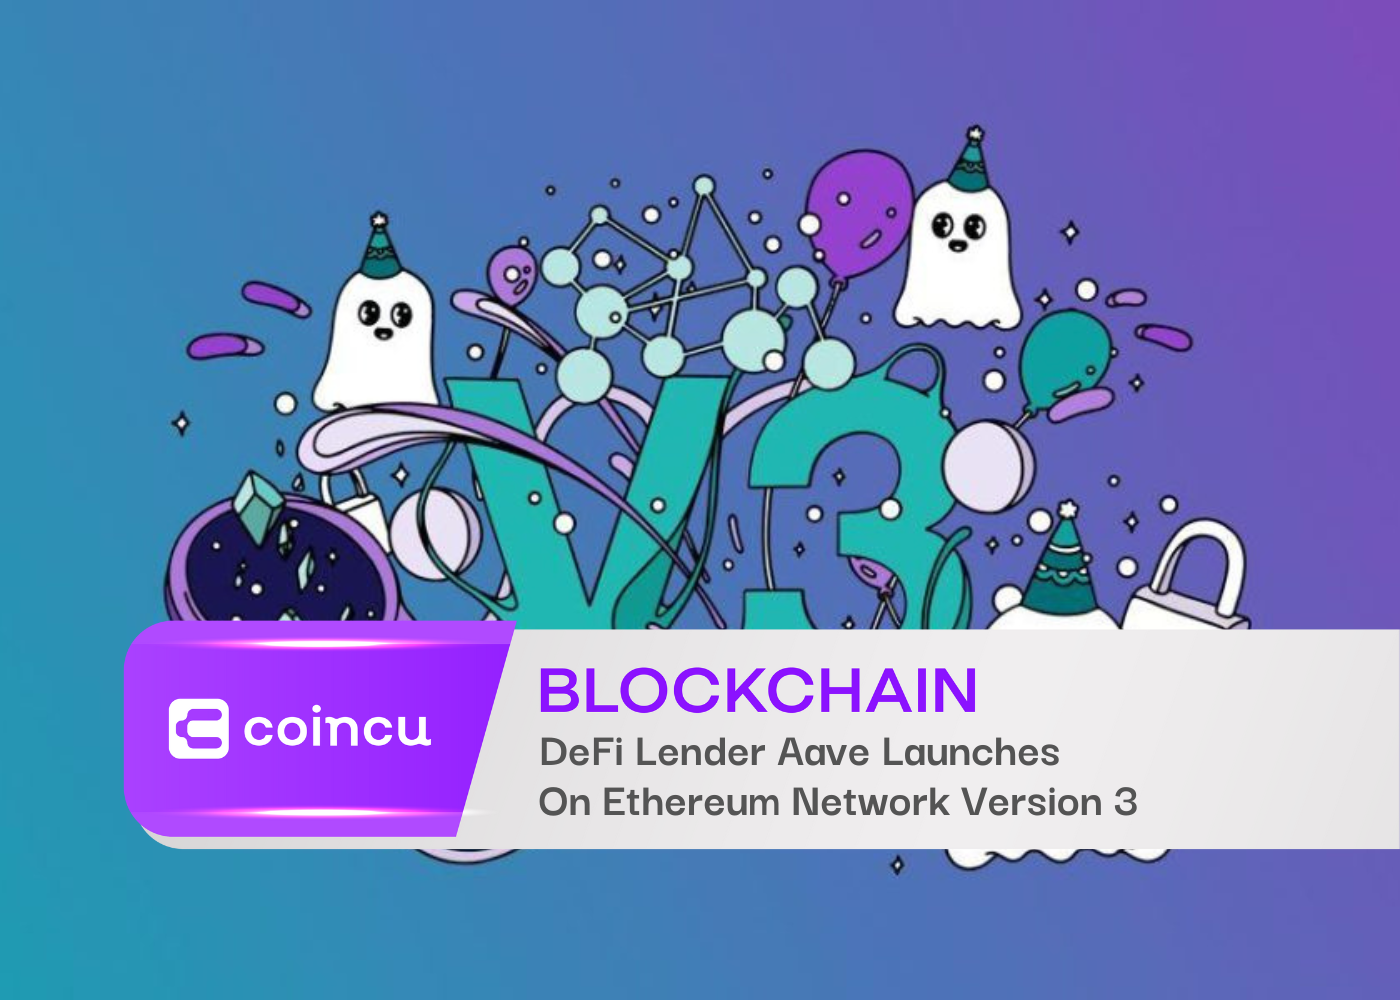 DeFi Lender Aave Launches